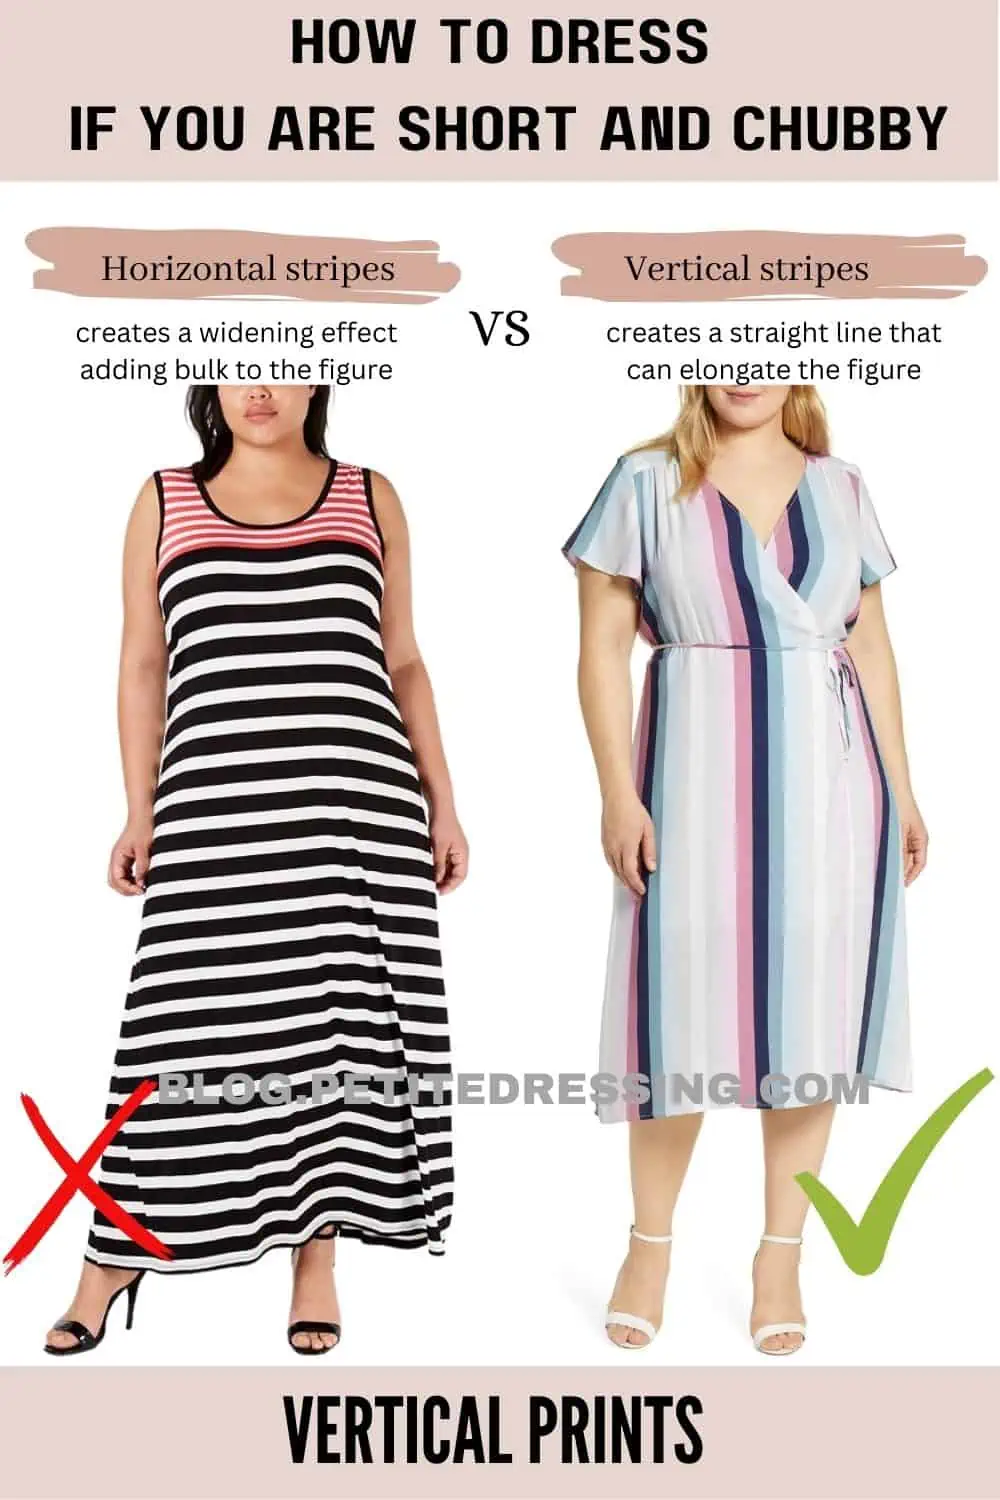 I'm a fashion guru & if you have big boobs, there's one type of dress you  should avoid - it'll only make you look bigger